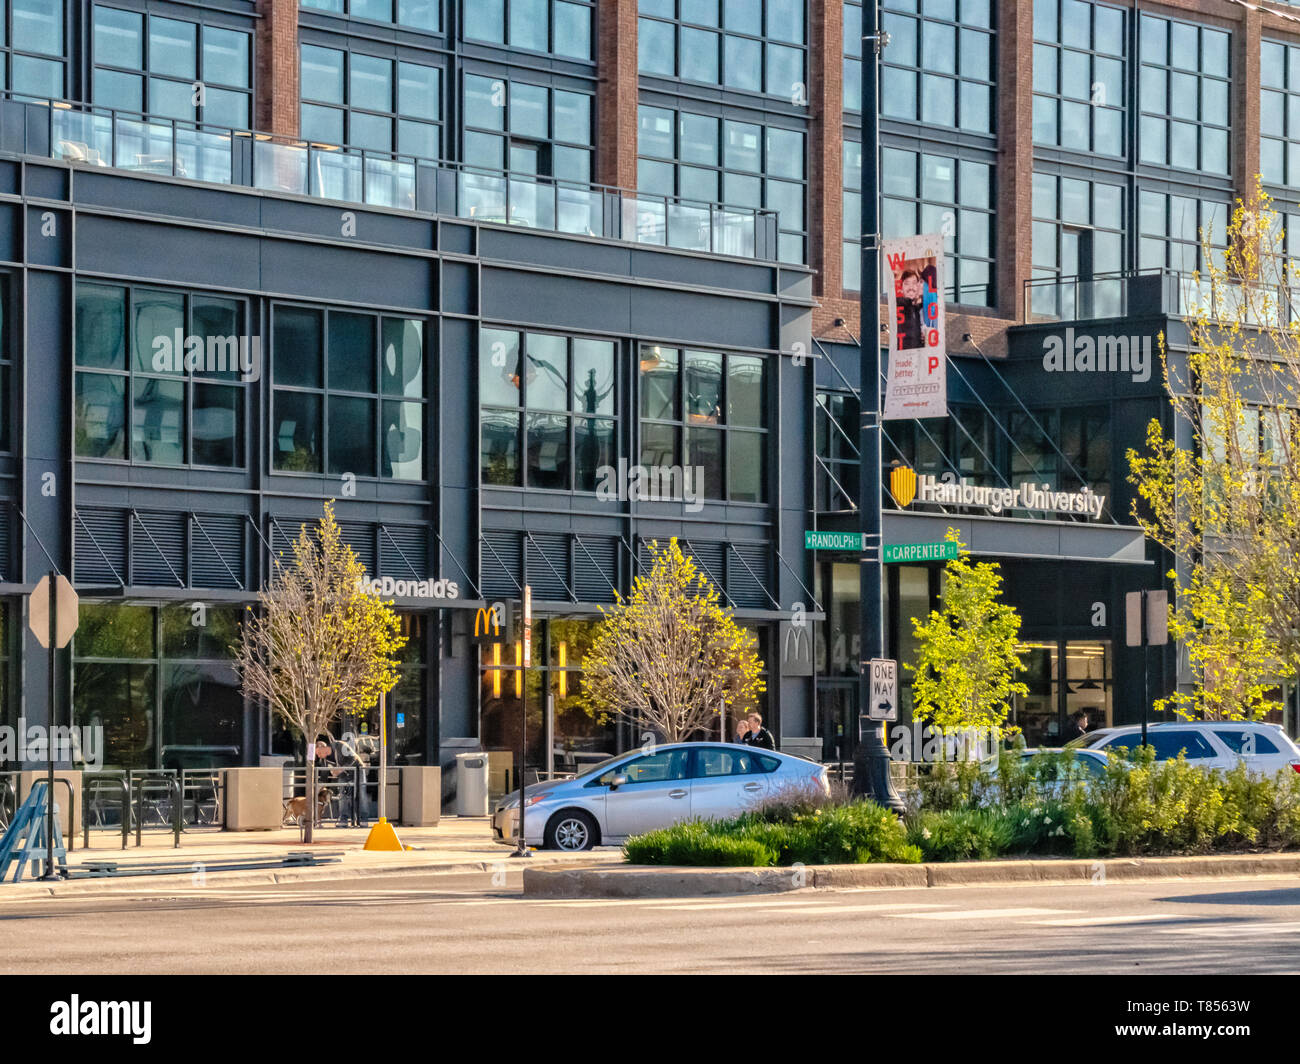 West Loop, Chicago-May 4, 2019: Hamburger University, McDonald's Corporate Headquarters located on the Near West Side. Main street in Chicago. Illinoi Stock Photo